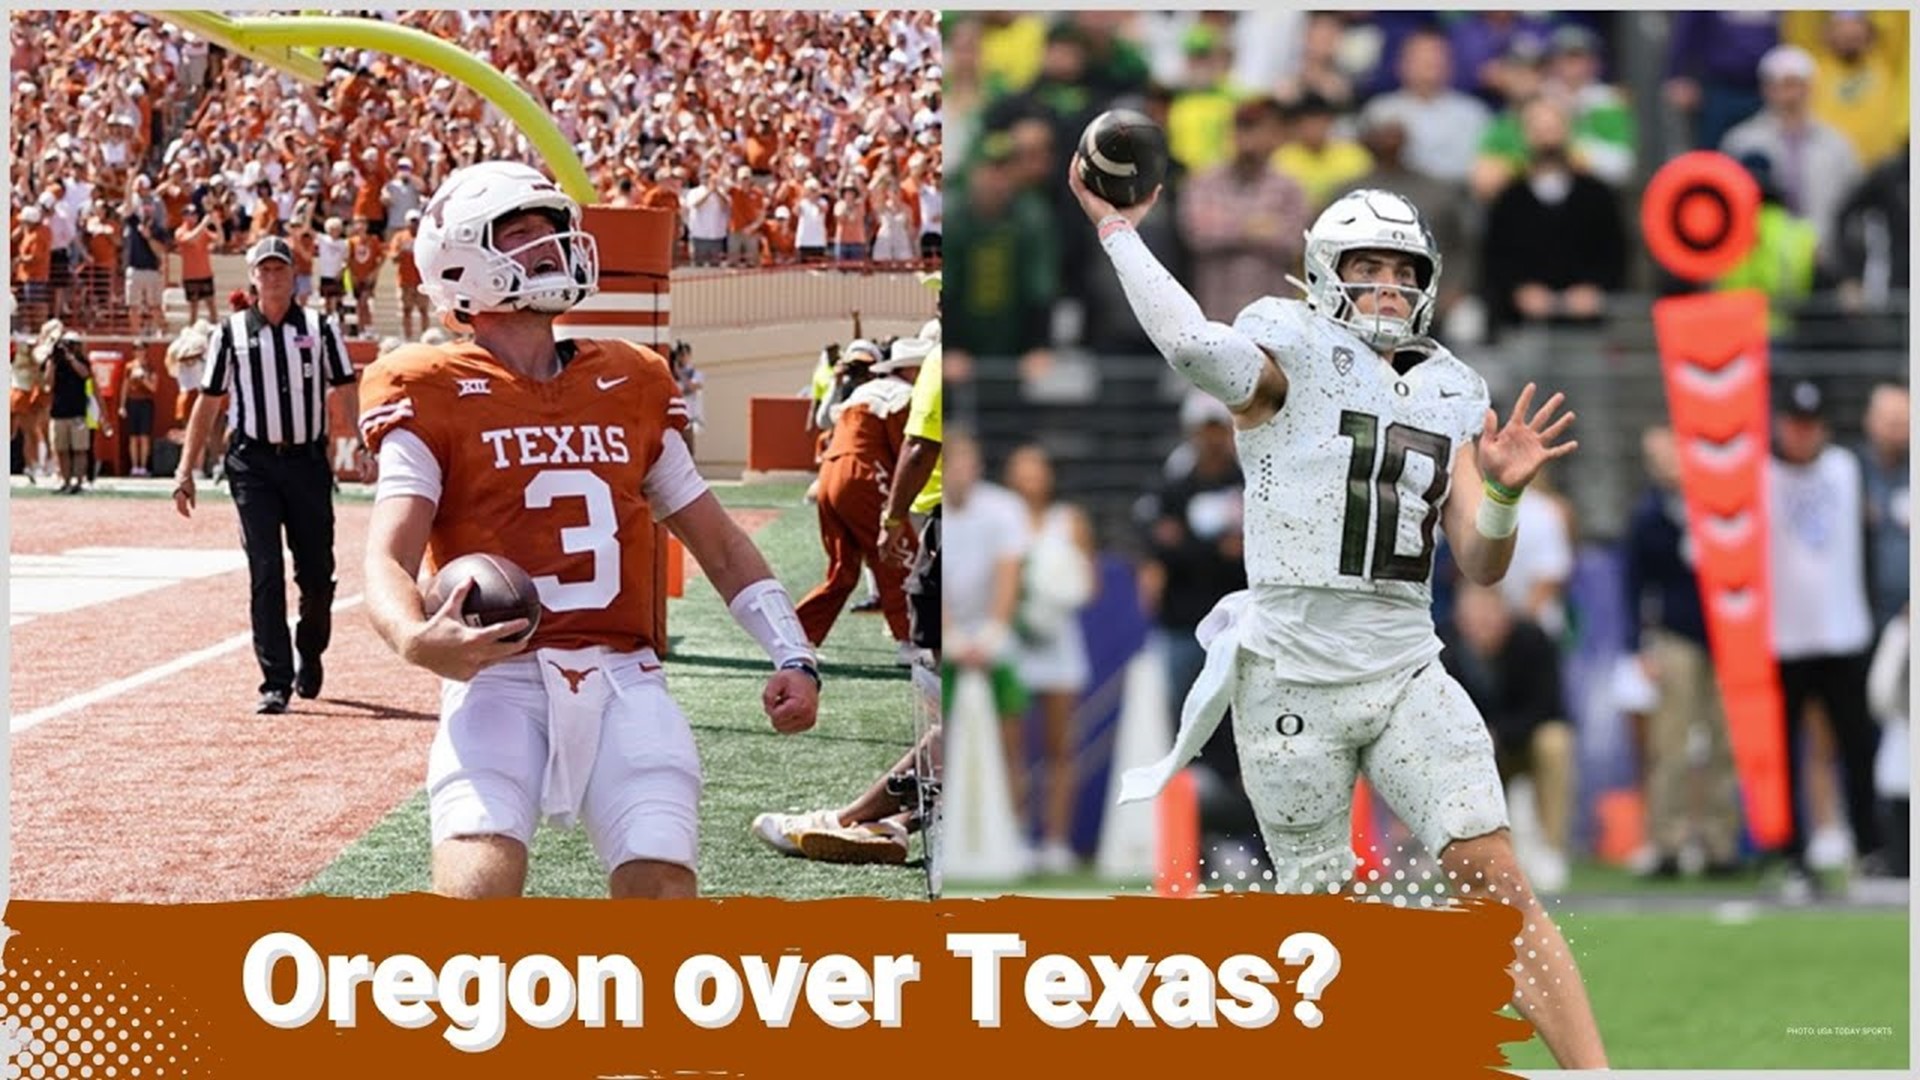 For the fifth straight week, the CFP committee has had the Oregon Ducks ranked above the Texas Longhorns, and for five straight weeks people have questioned that